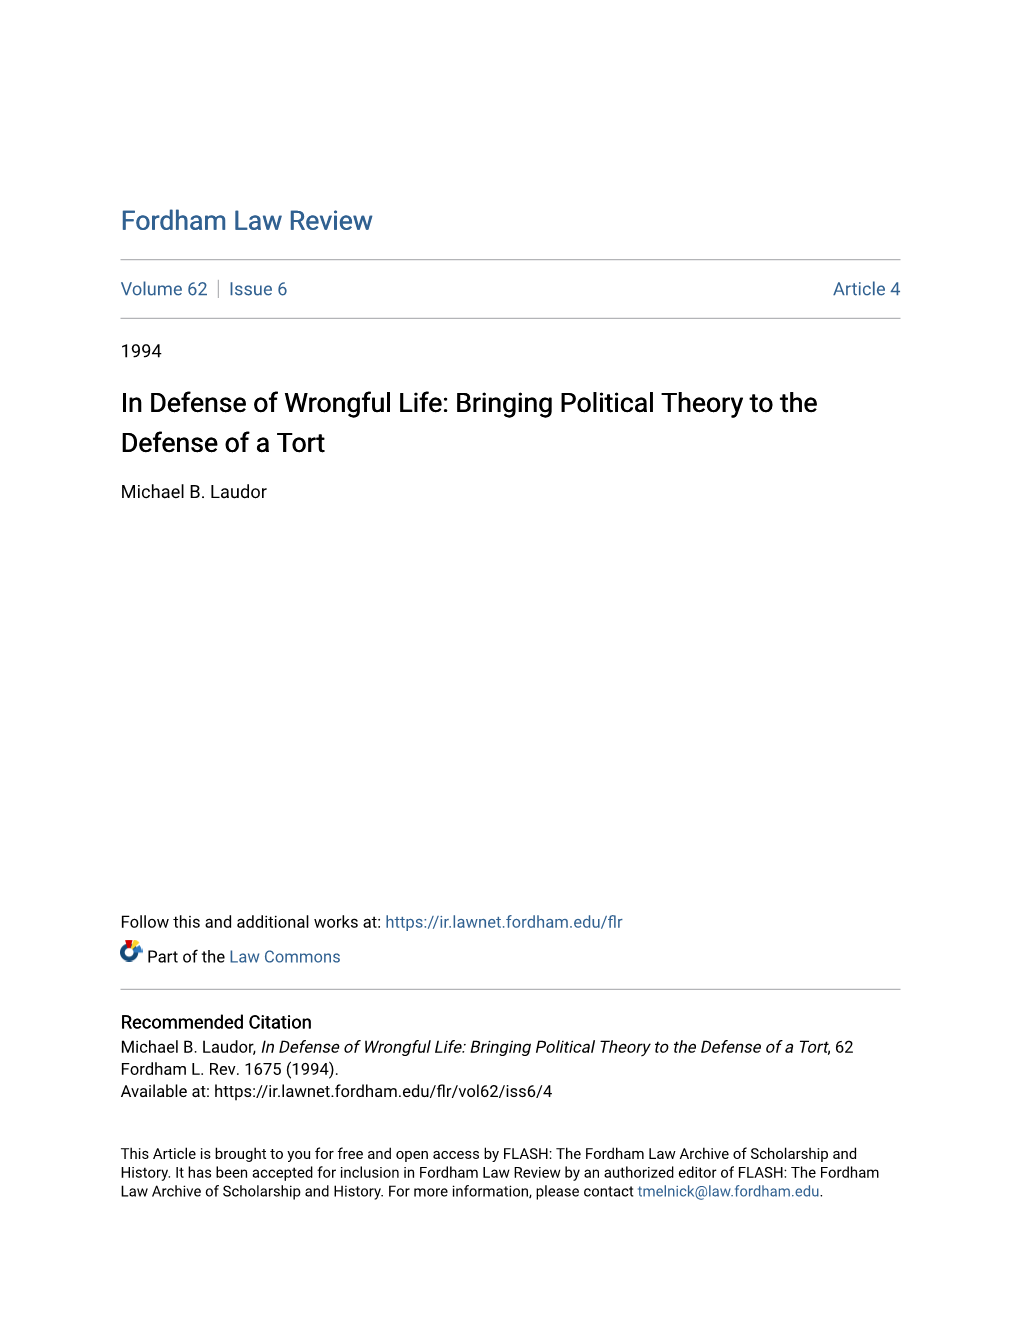 Bringing Political Theory to the Defense of a Tort